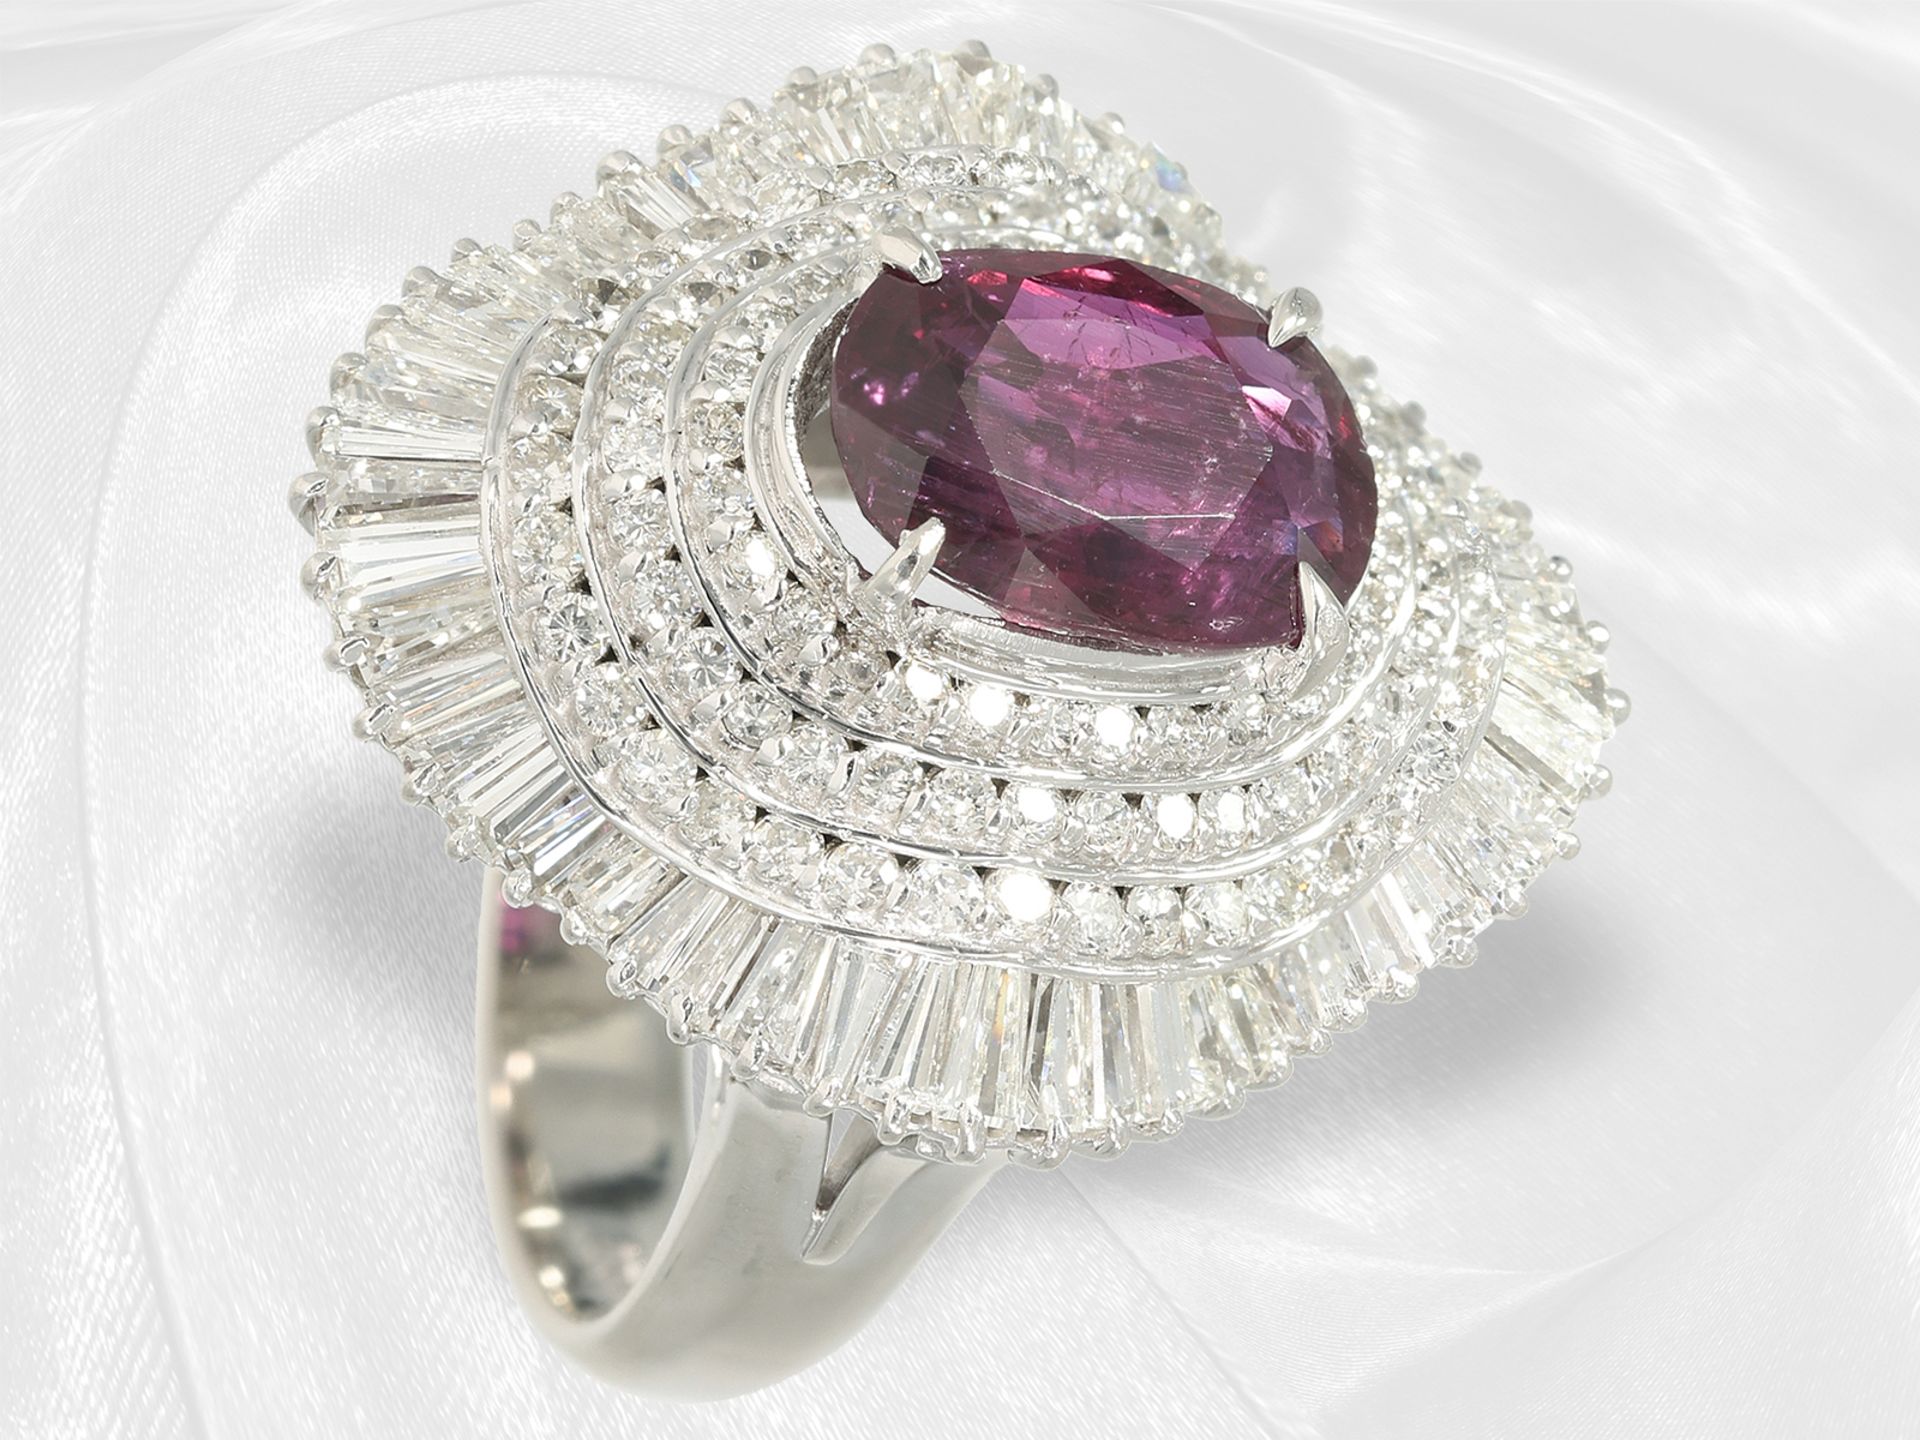 Ring: formerly very expensive, highly refined ruby/diamond ballerina cocktail ring, platinum, approx - Image 6 of 7